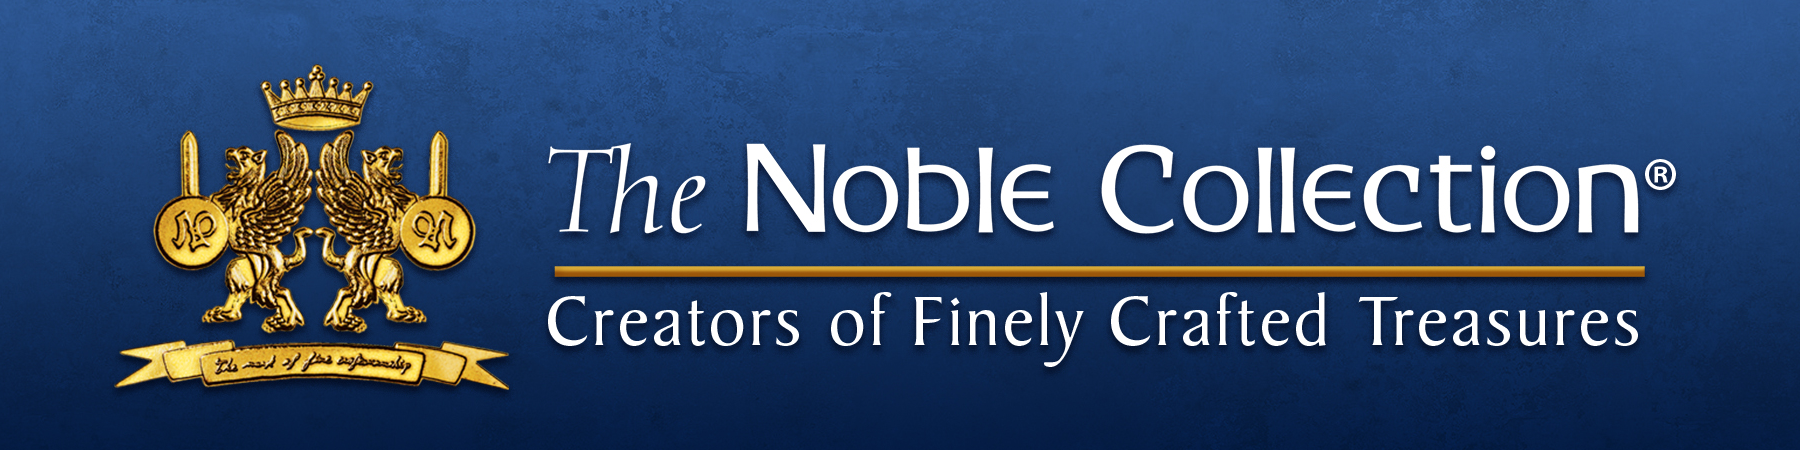  The Noble Collection